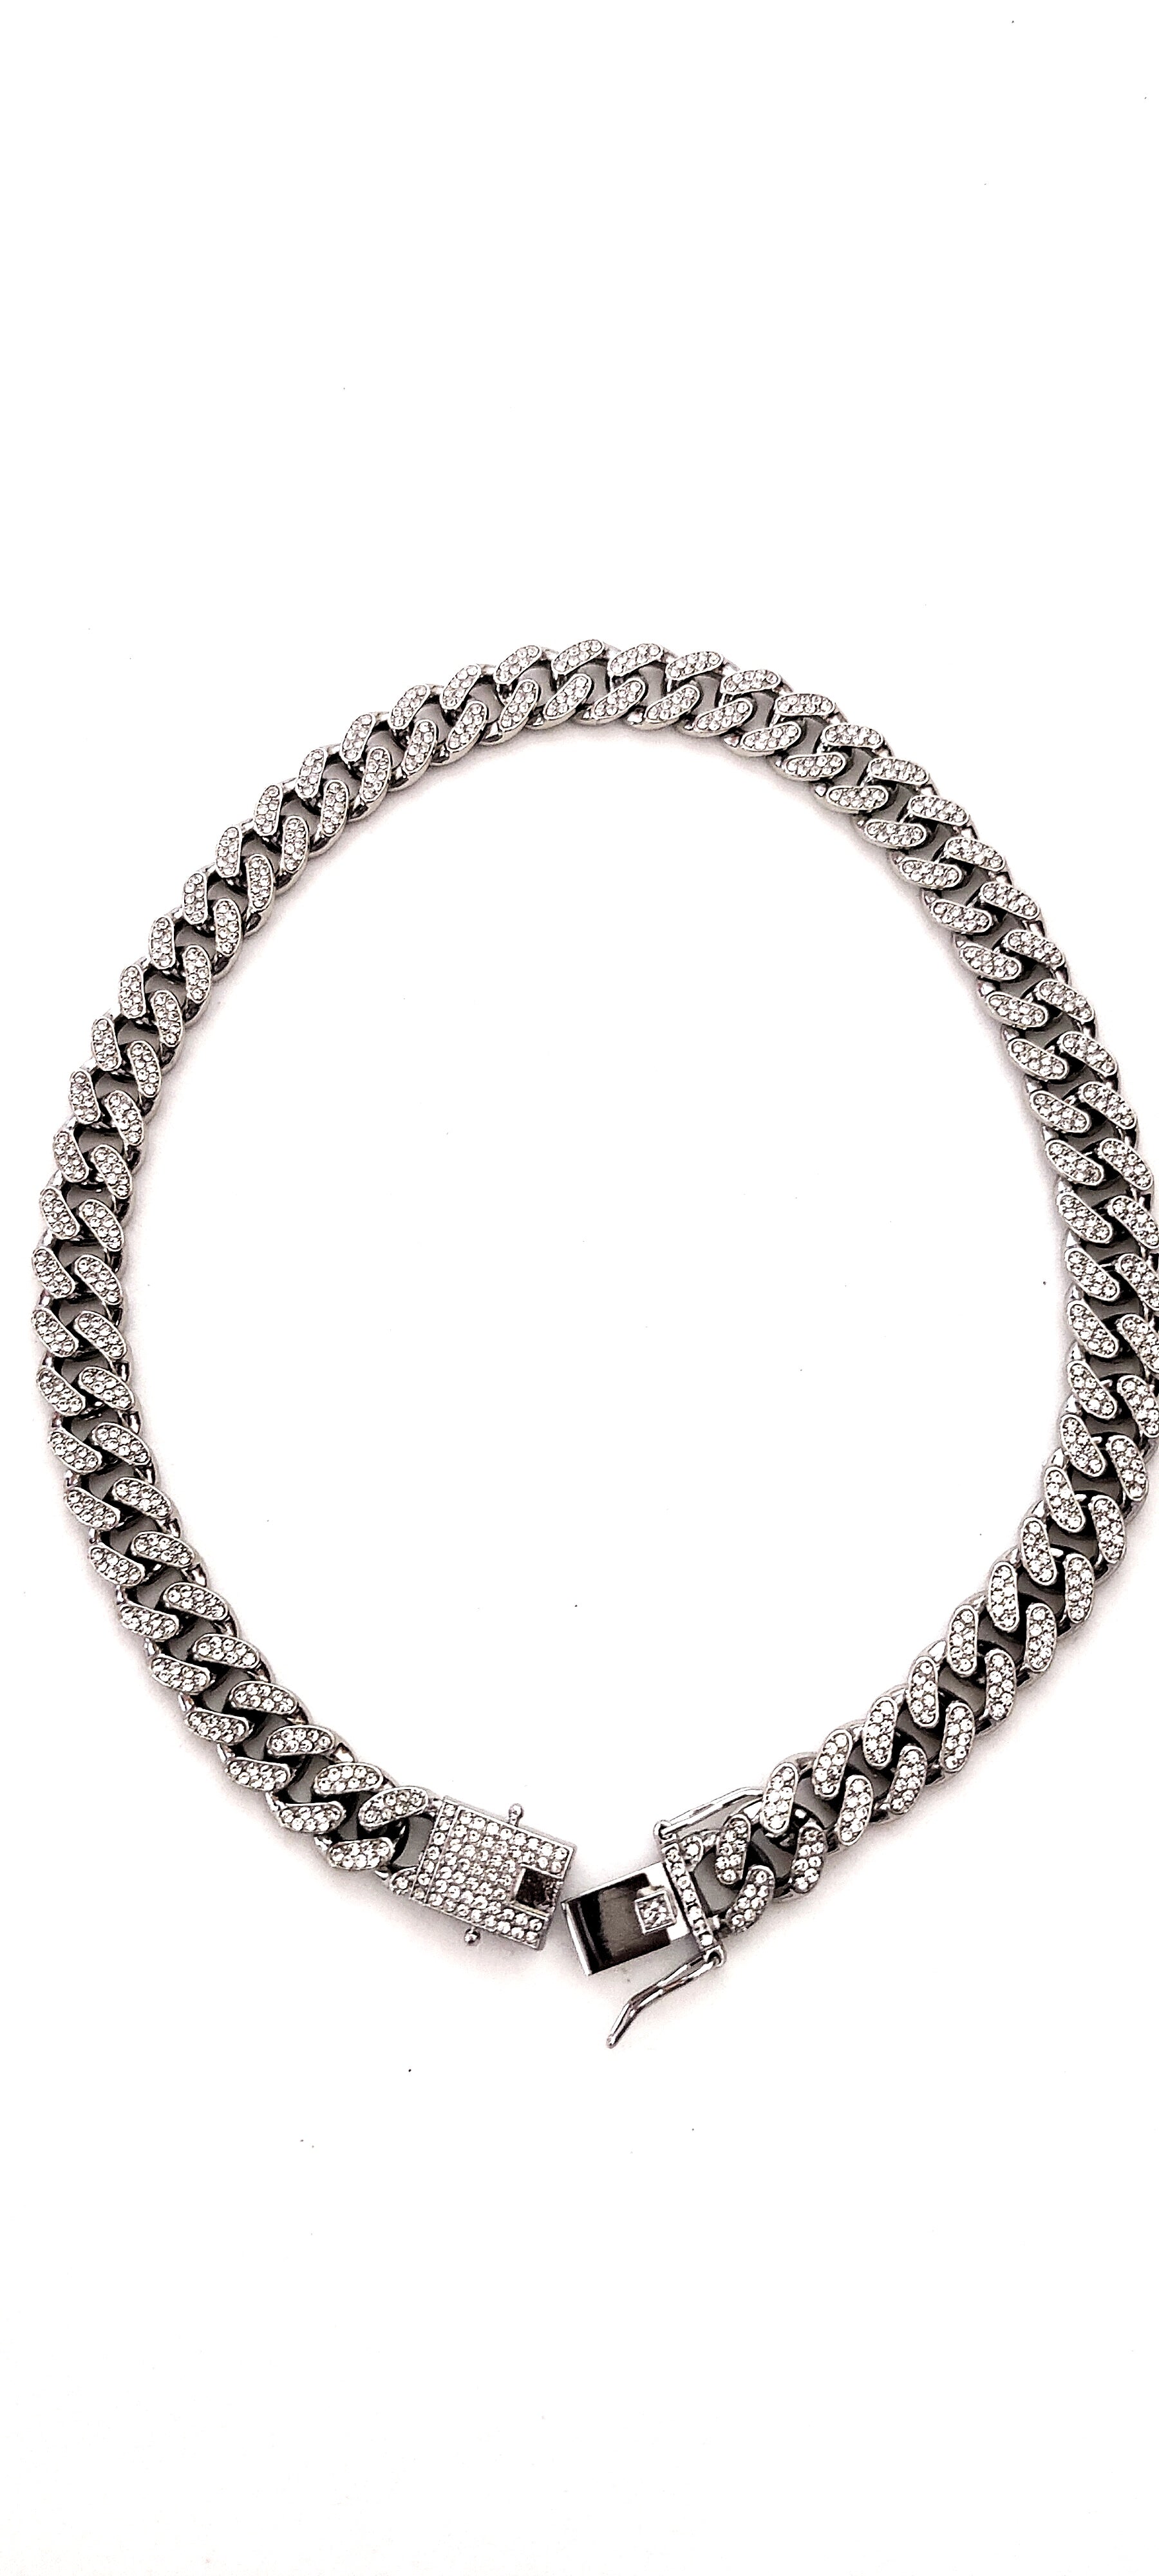 Artic Ice Cuban Link necklace by Freshice